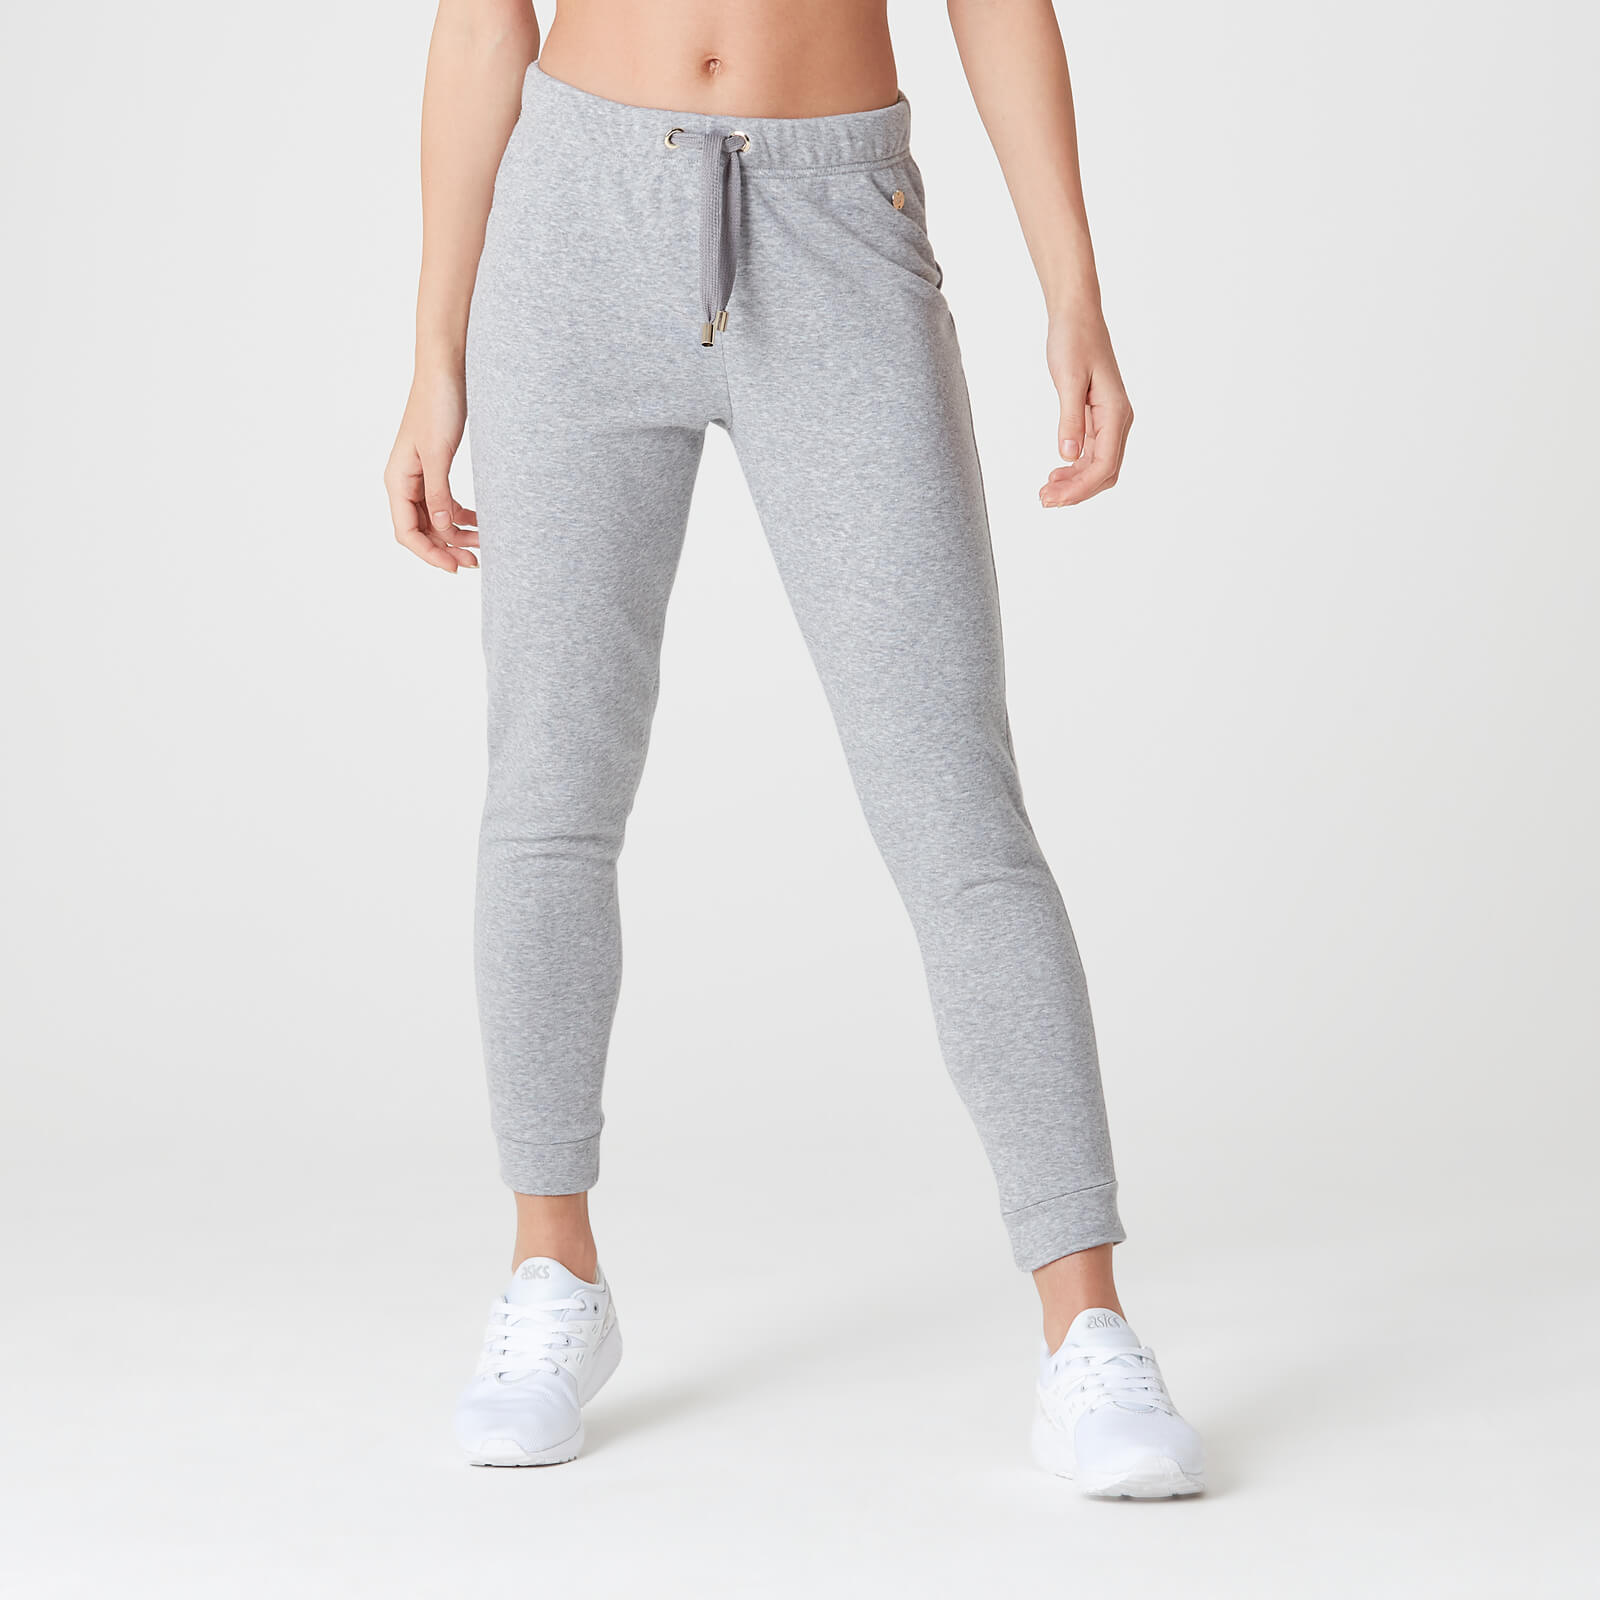 Myprotein Luxe Lounge Jogger - Grey Marl - S